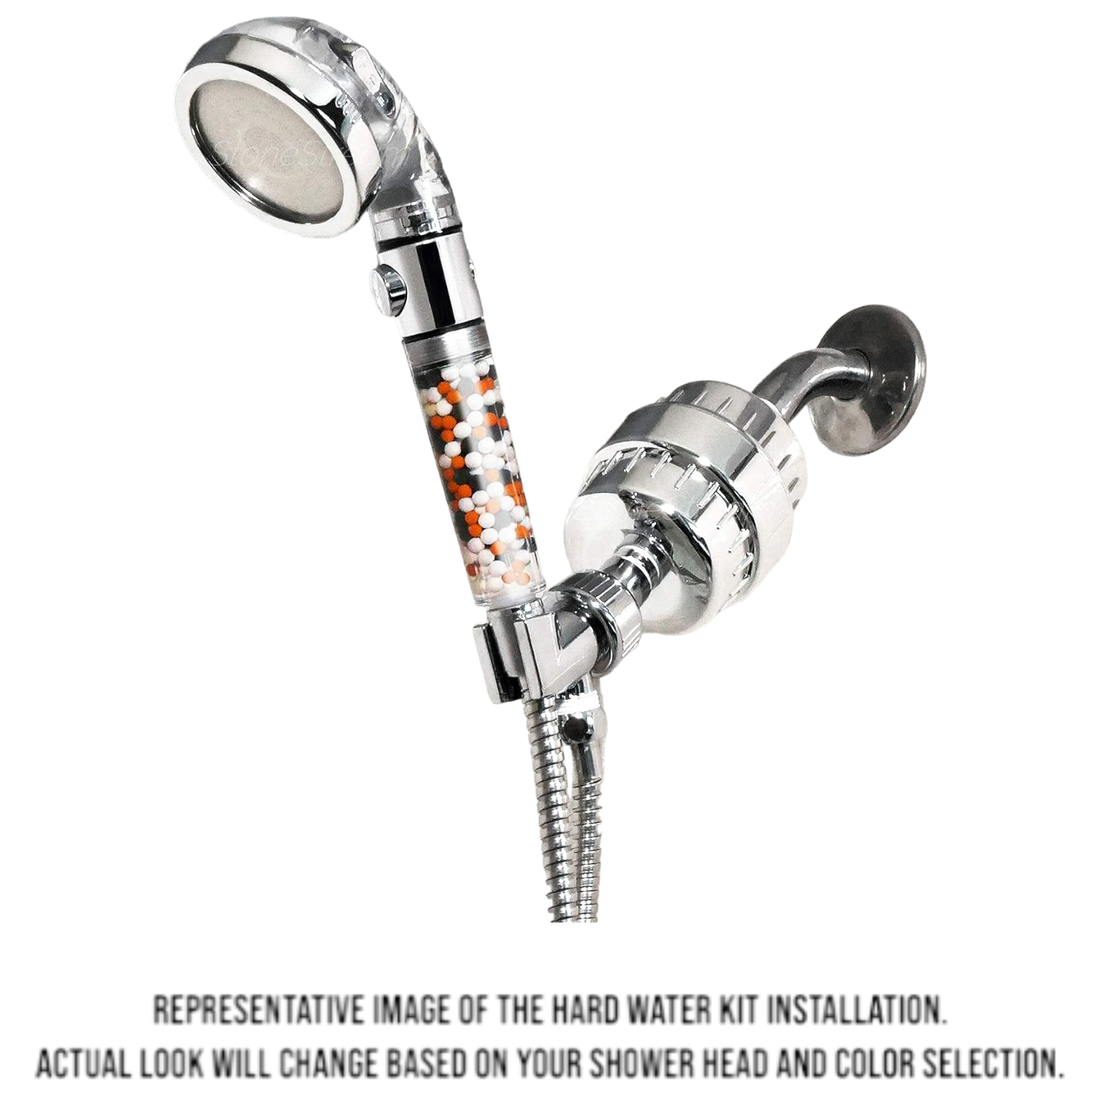 10-Mode Luxury Shower Head with Hard Water Filtration Kit